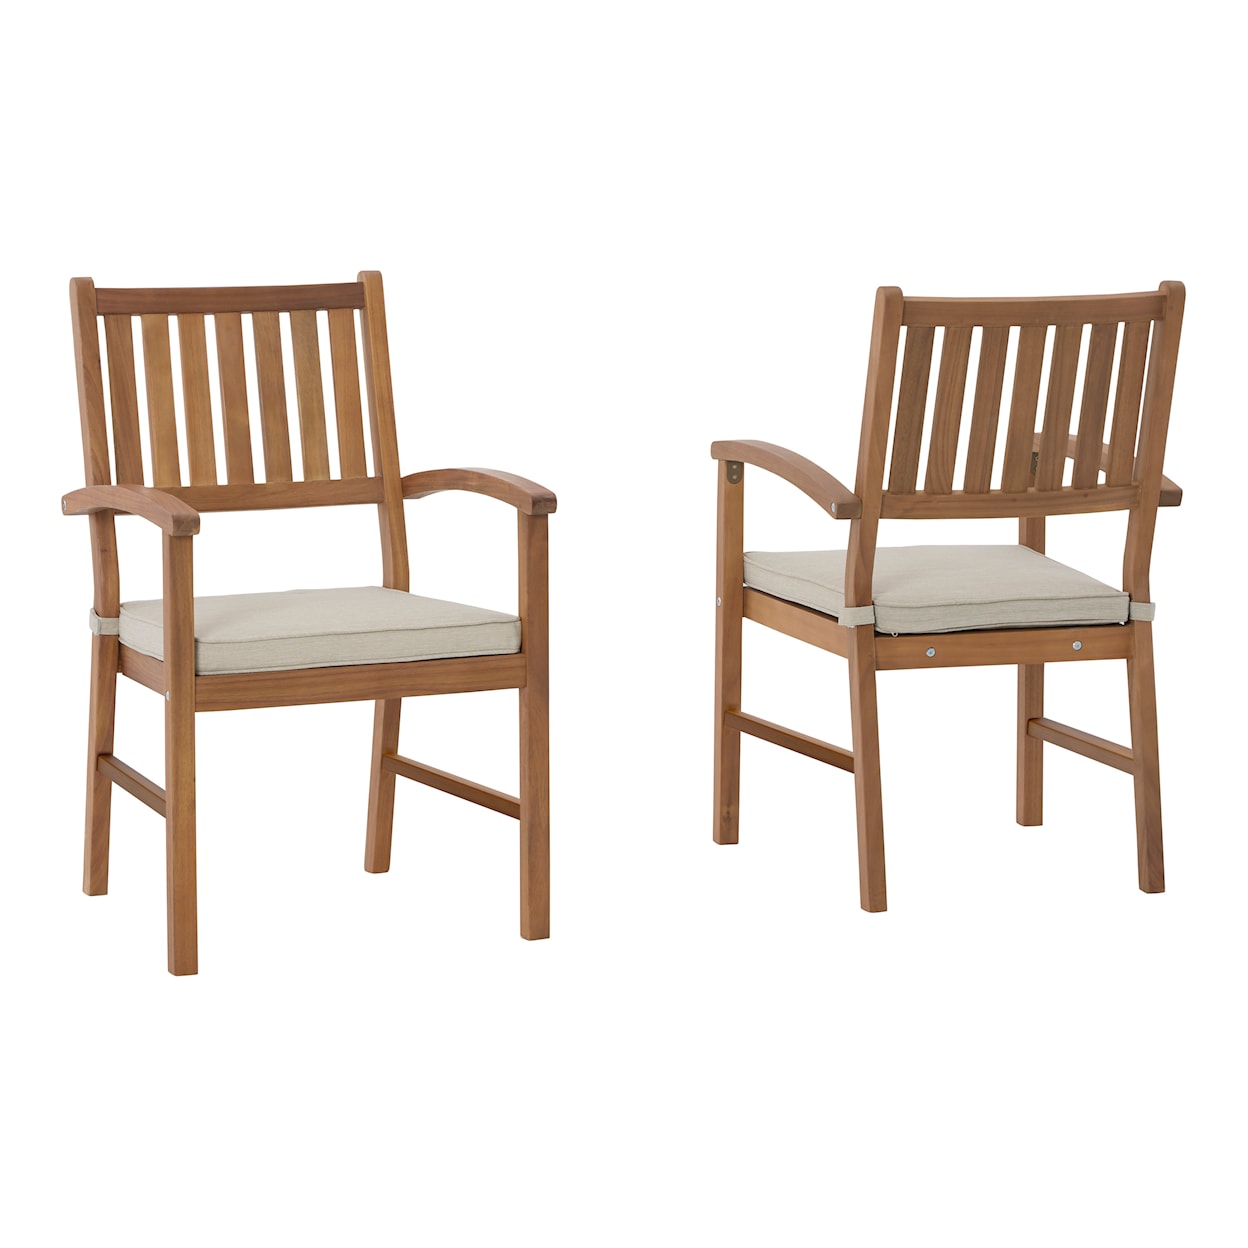 Ashley Janiyah Outdoor Dining Set w/ 2 Chairs & Bench